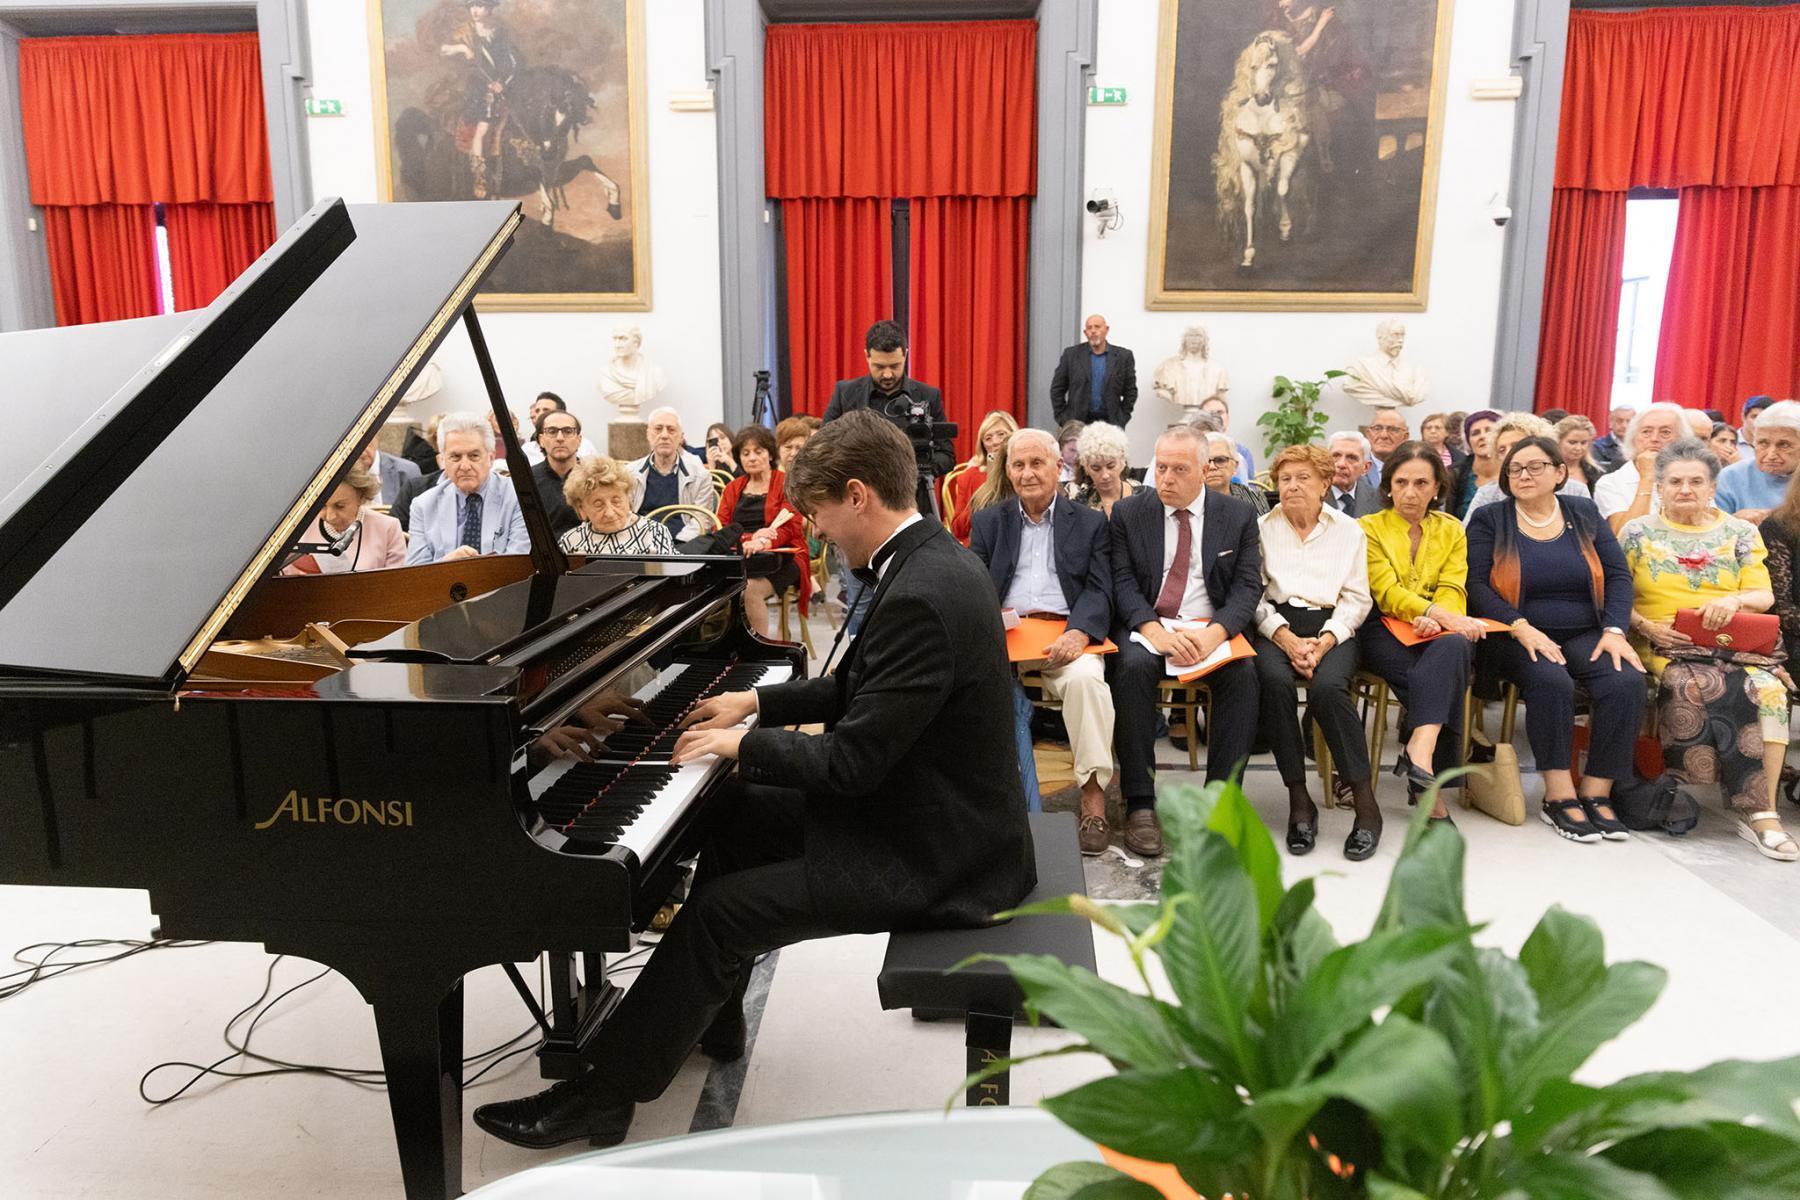 The 32nd International Piano Competition 